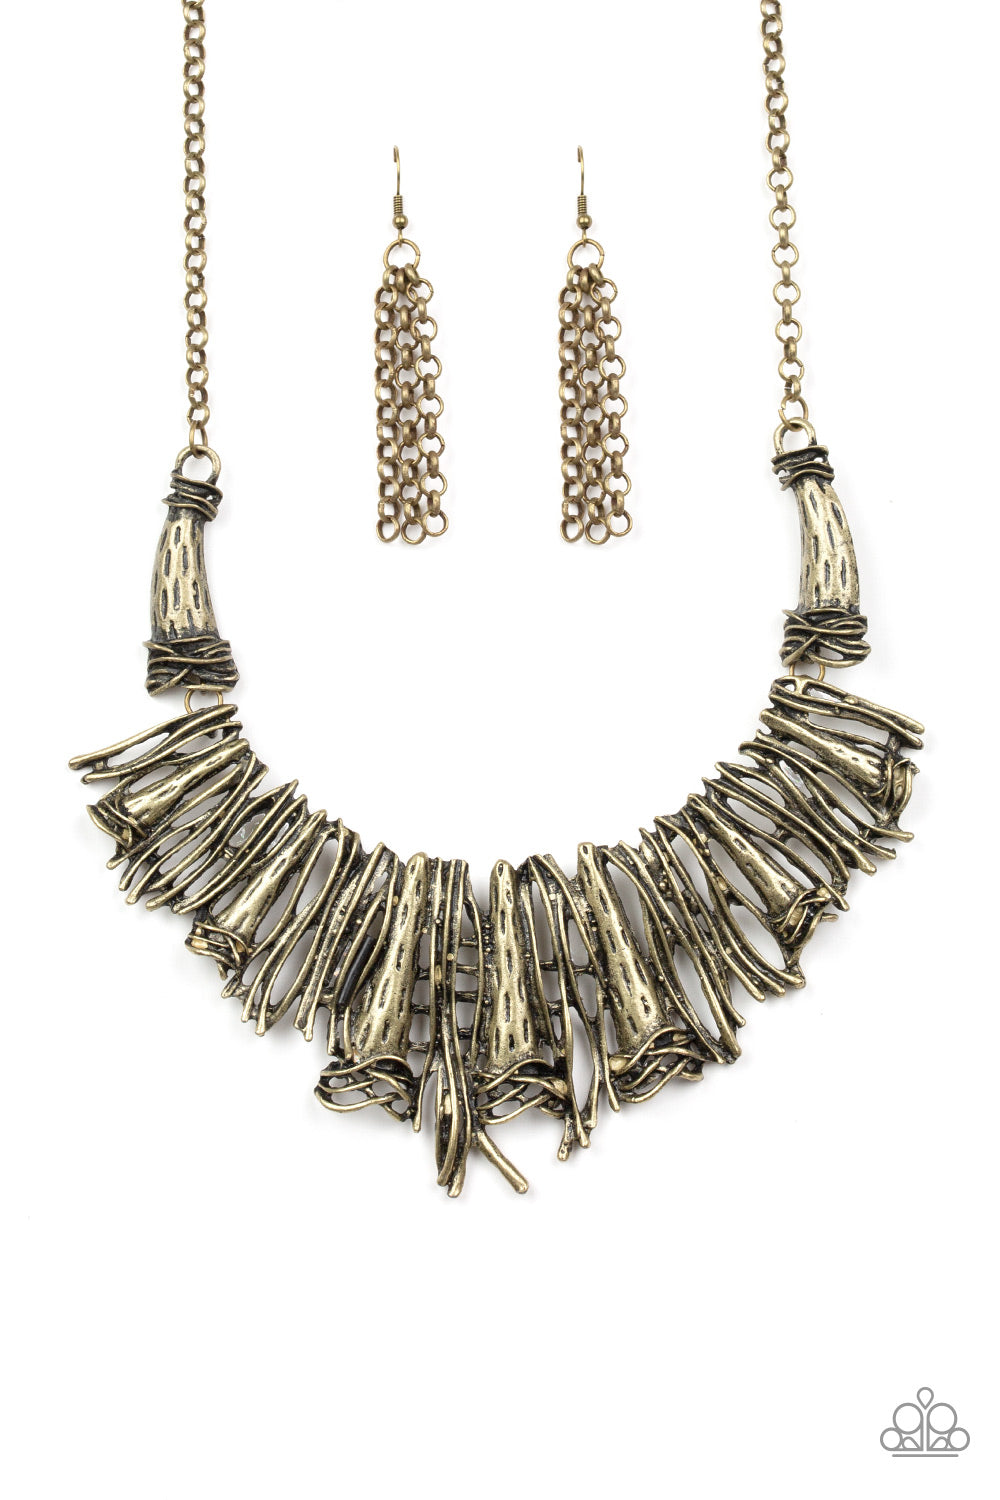 Paparazzi Accessories In the MANE-stream - Brass Necklaces - Lady T Accessories